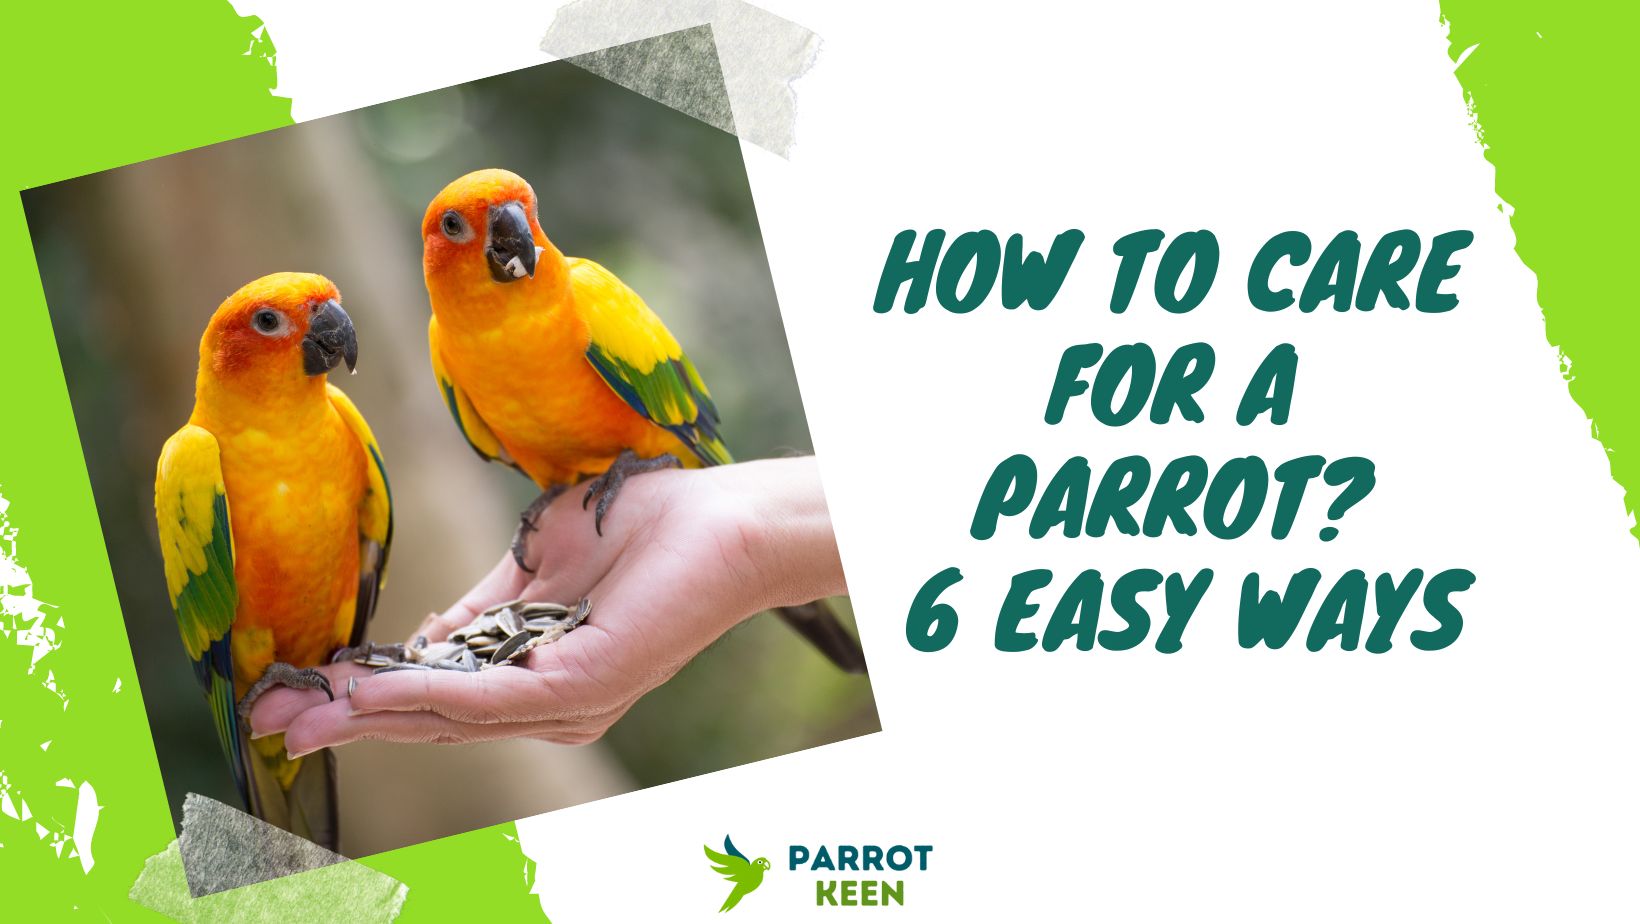 How to Care for a Parrot 6 Easy Ways to care for a Parrot